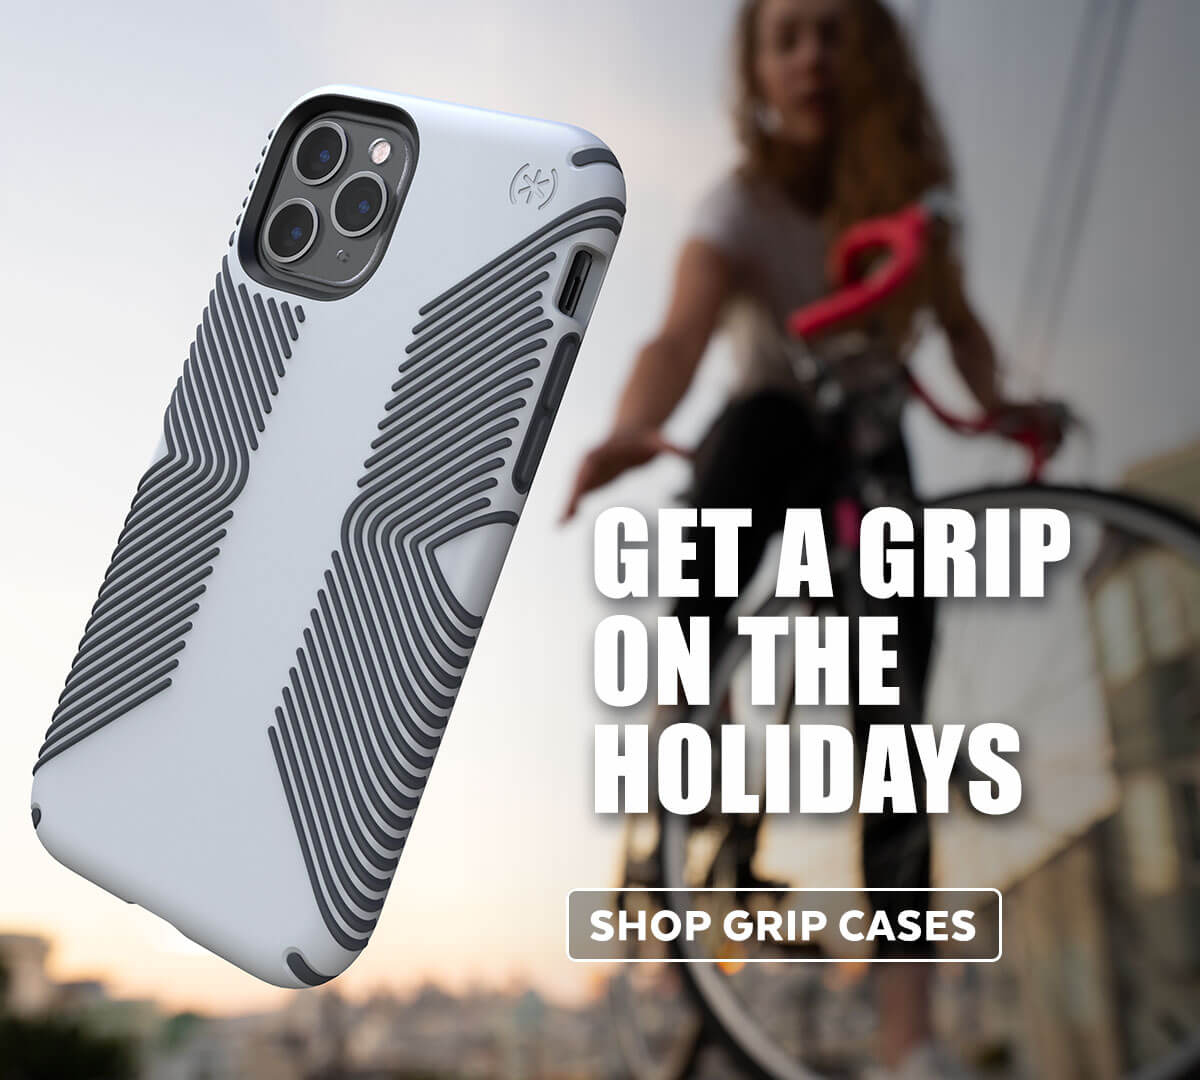 Get a Grip on the holidays. Shop Grip Cases.